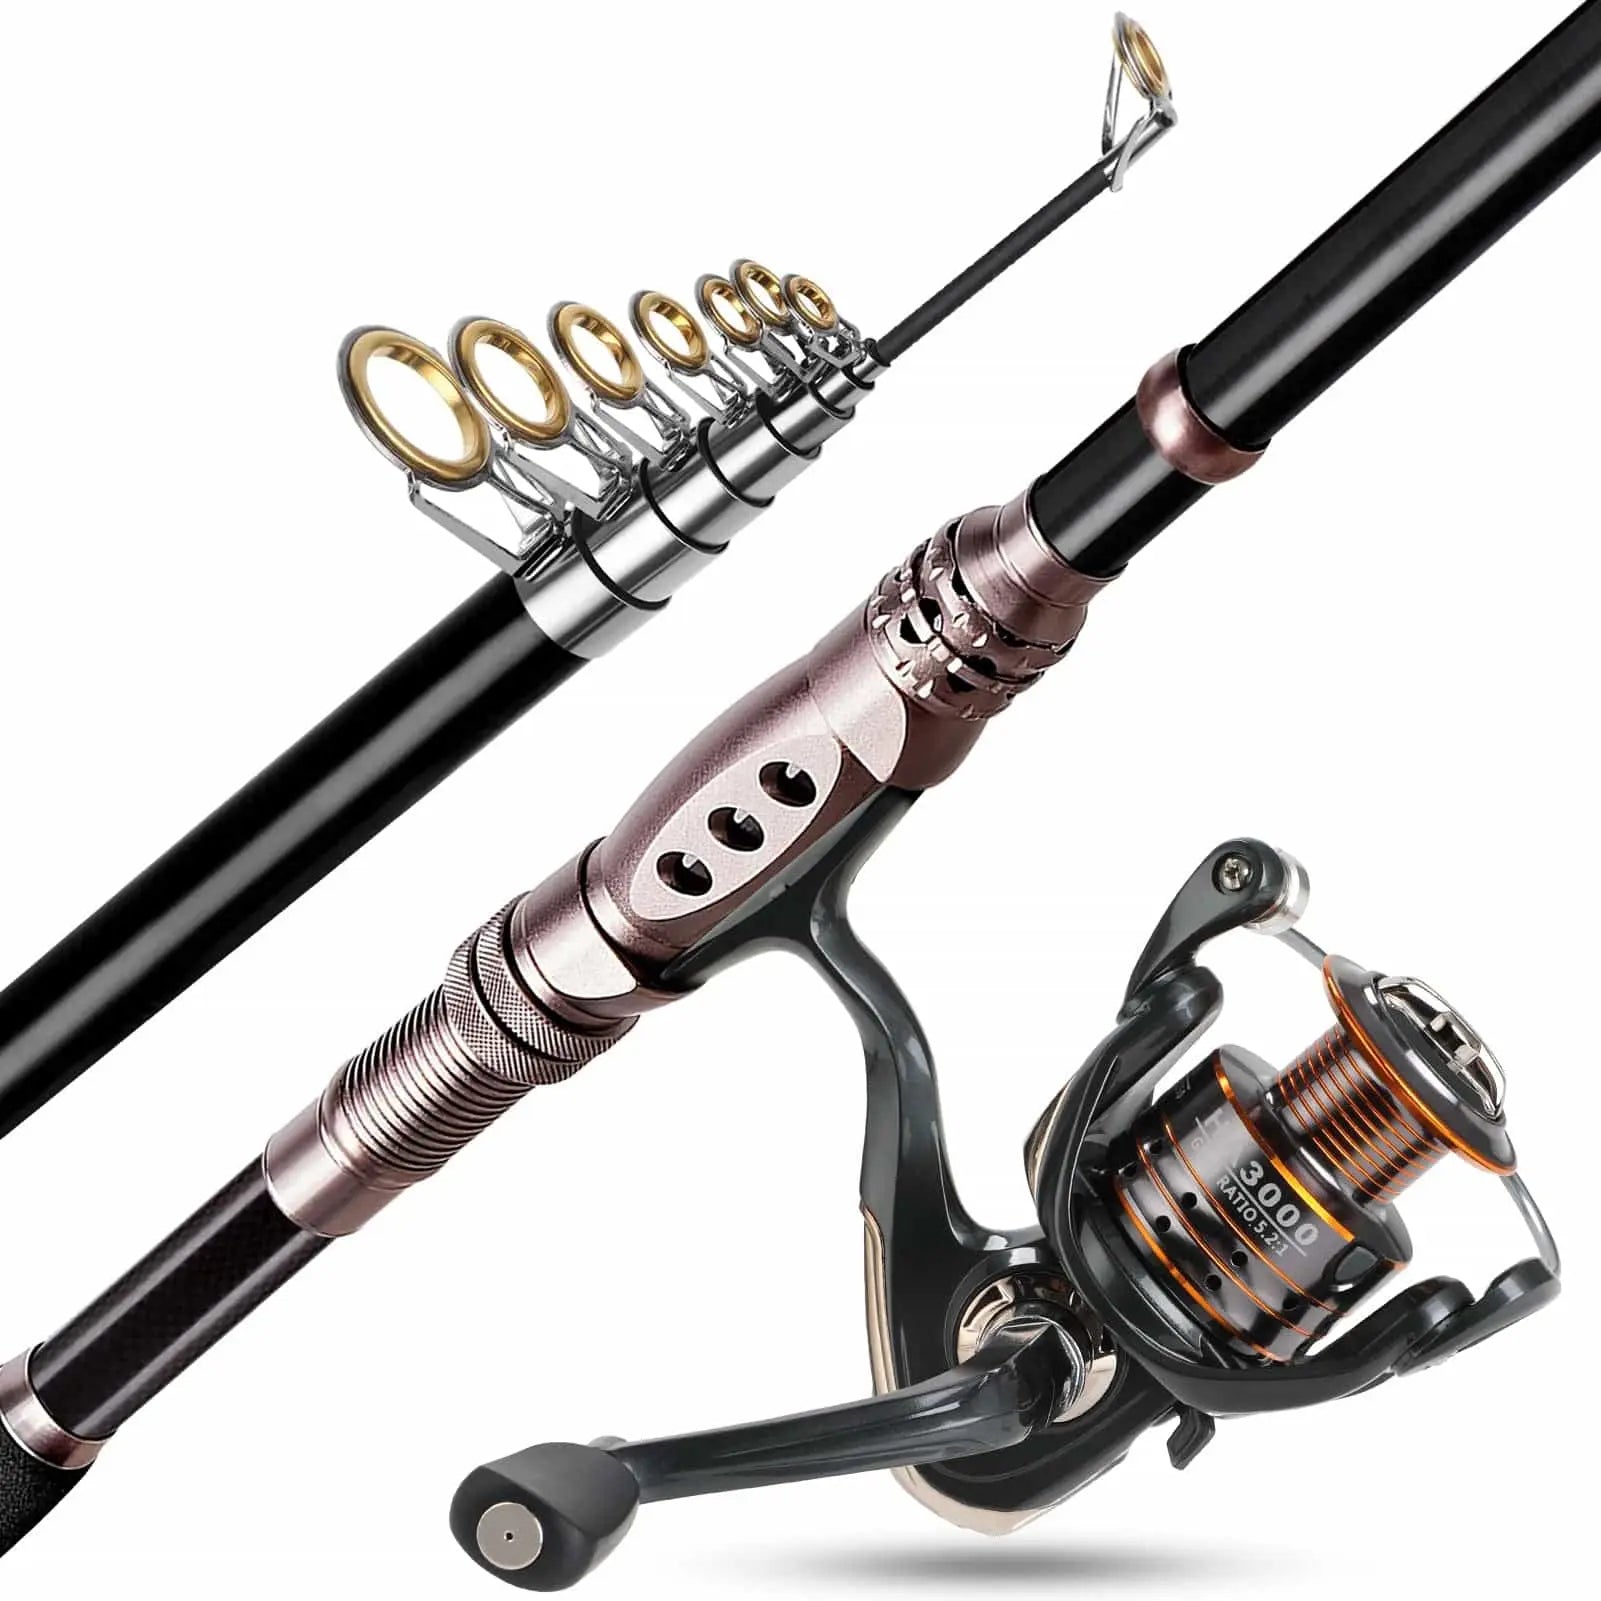 PLUSINNO Telescopic Fishing Rod and Reel Combos, Pink Spinning Pole for  Women and Girls, Includes Fishing Tackle